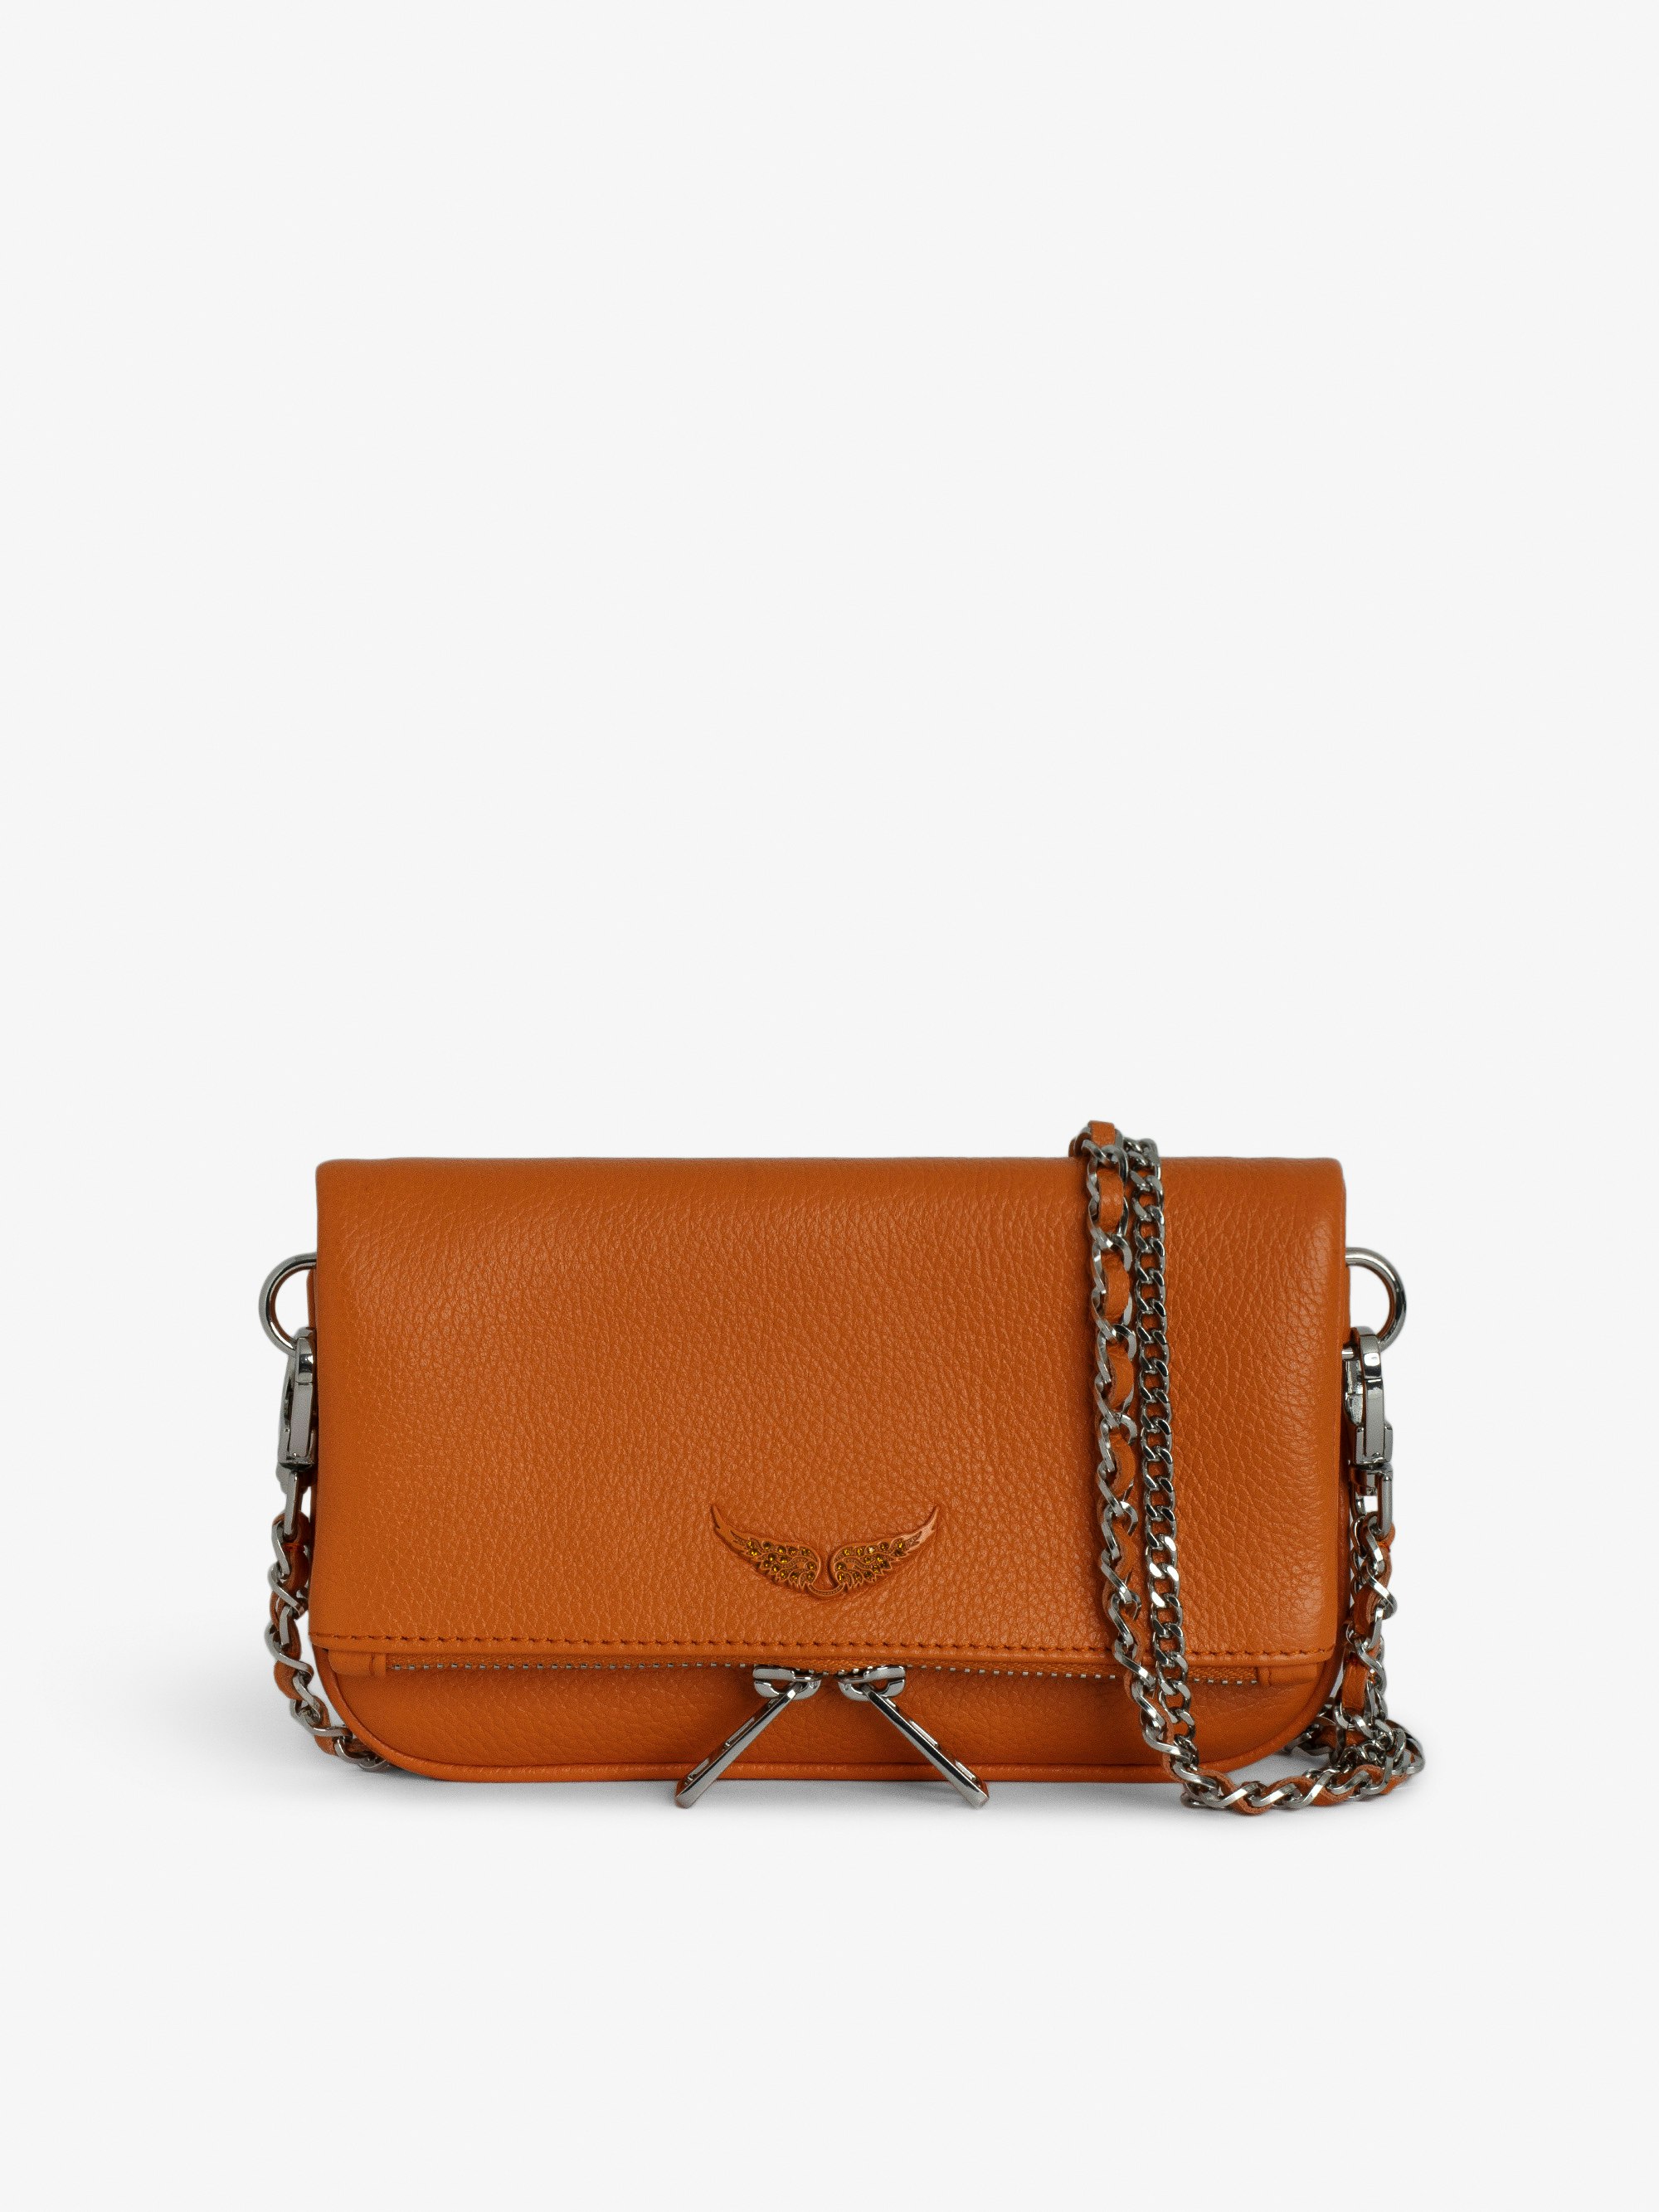 Rock Nano Clutch - Orange small grained leather clutch with double leather and metal strap.